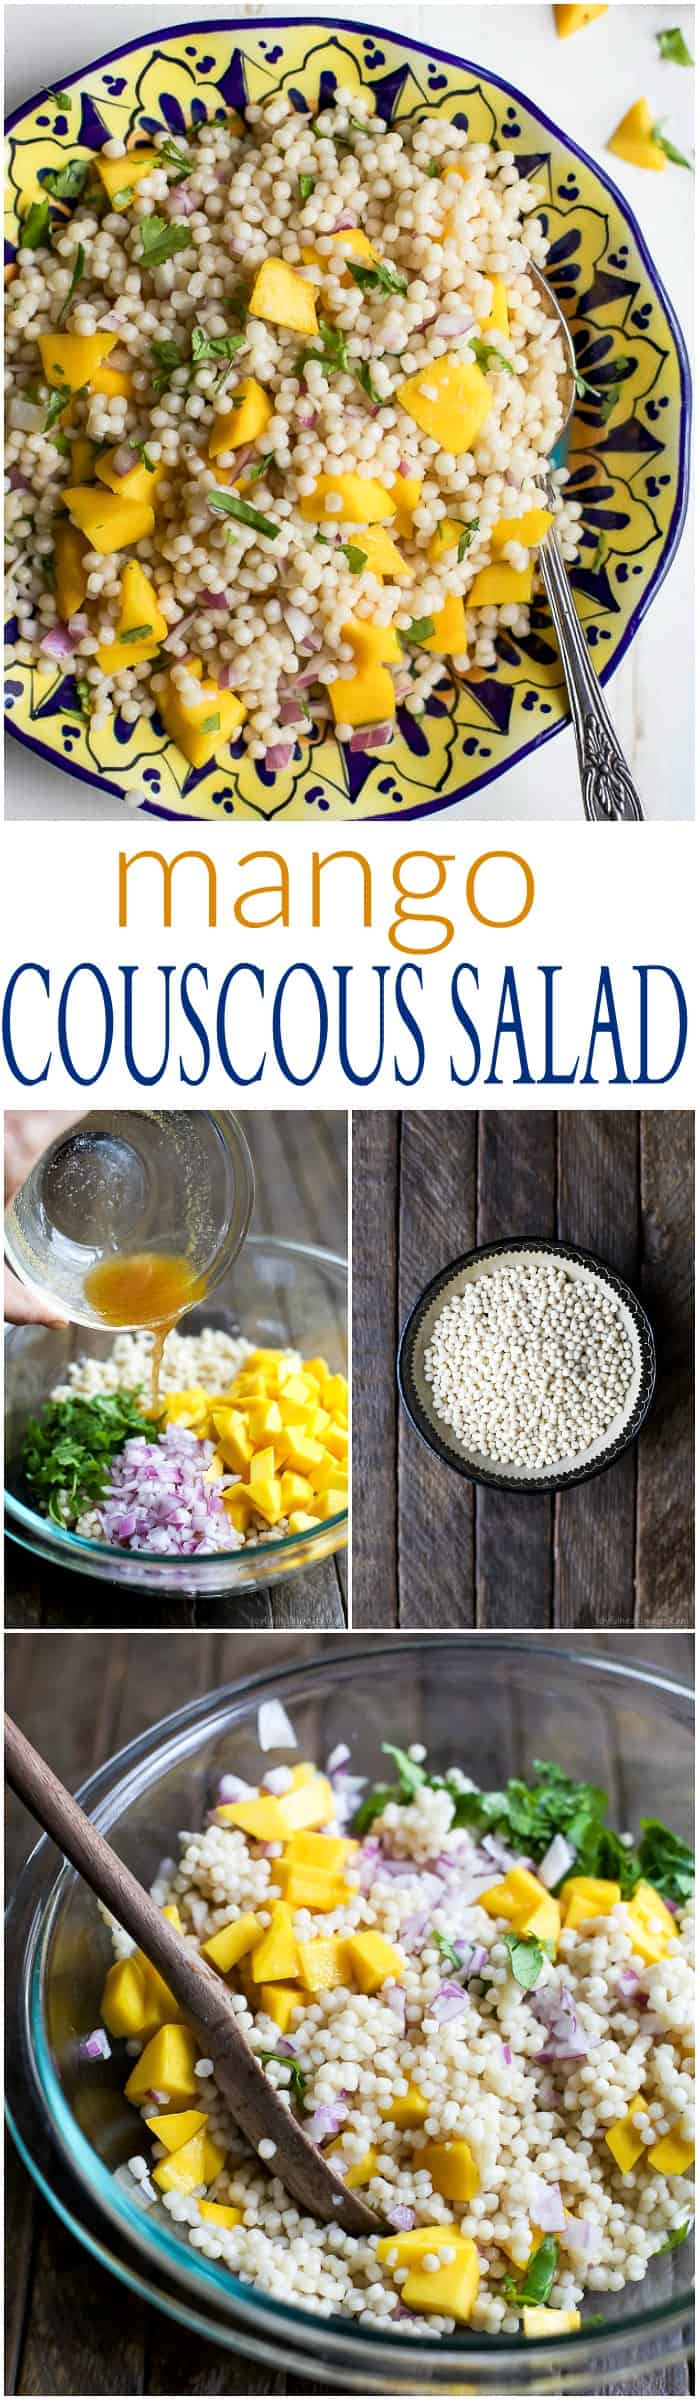 An Easy Mango Couscous Salad packed with sweet mango and a light dressing. This salad is a quick 15 minute side dish you're family will love, perfect with seafood or chicken. | joyfulhealthyeats.com